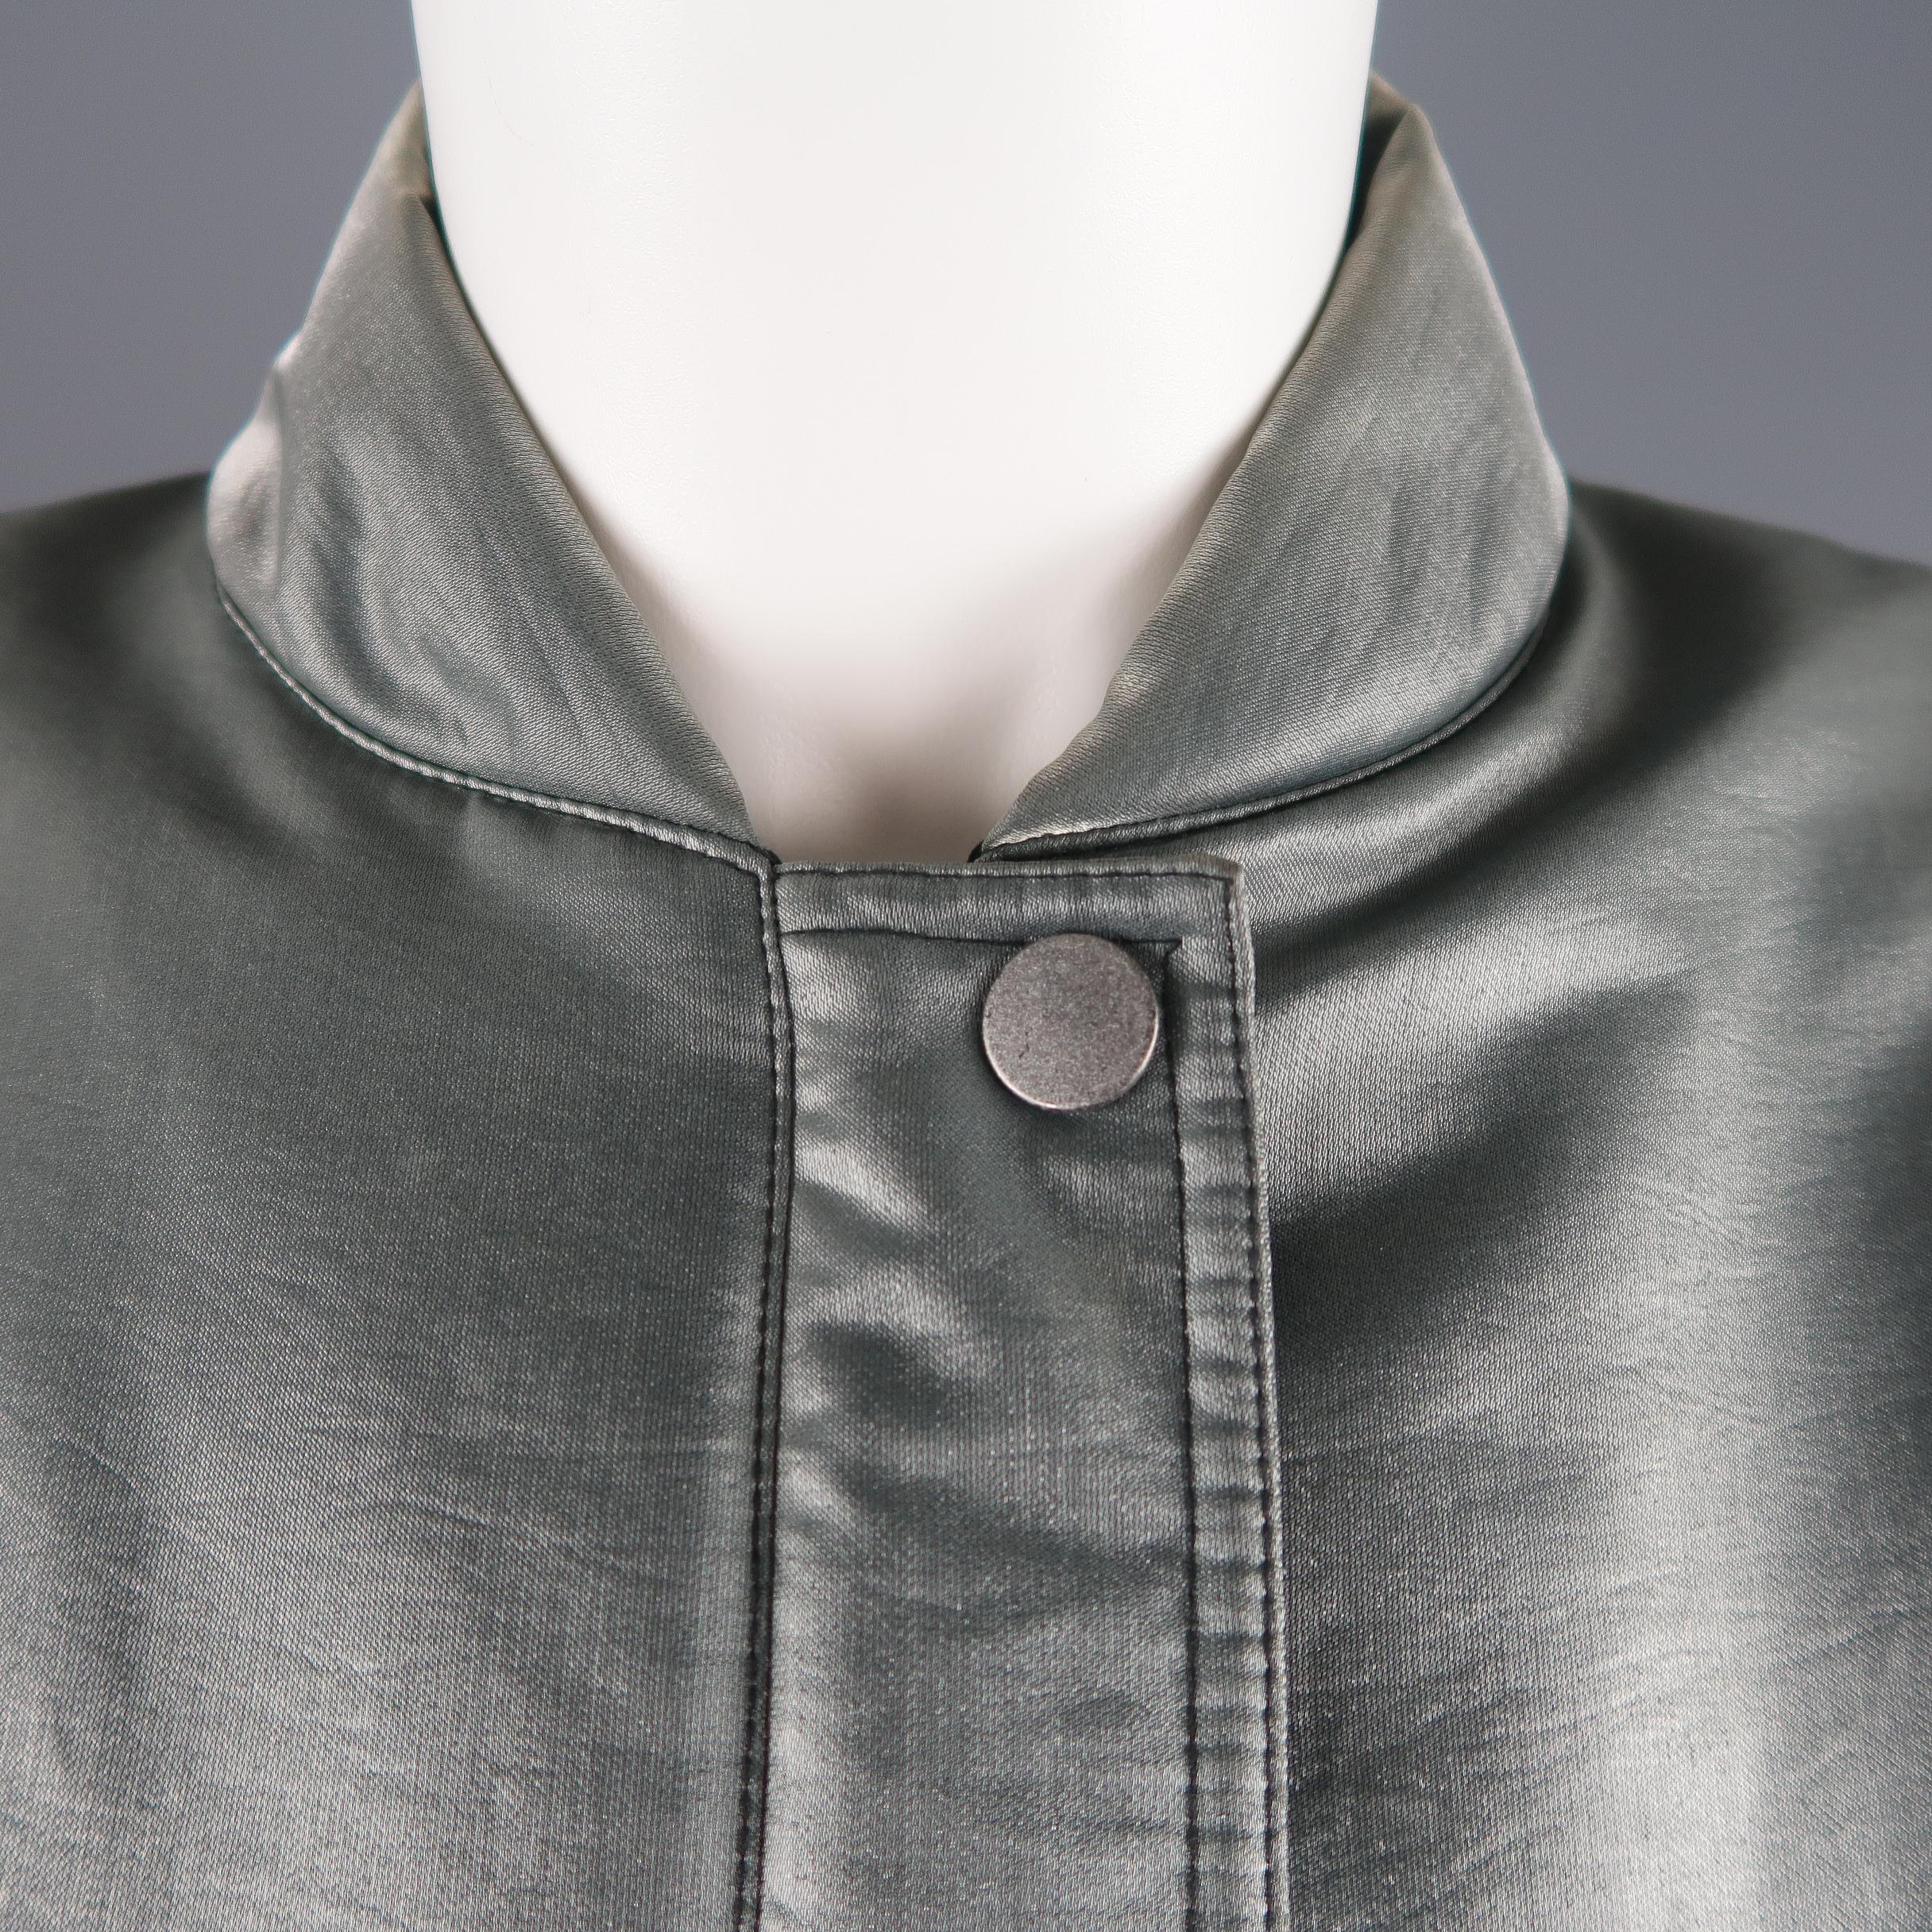 Vintage STATE OF CLAUDE MONTANA cropped bomber jacket comes in metallic teal gray taffeta with a hidden snap placket zip closure, baseball collar, slanted pockets, and elastic waistband and cuffs. Minor wear. 

Made in Italy. 
Good Pre-Owned